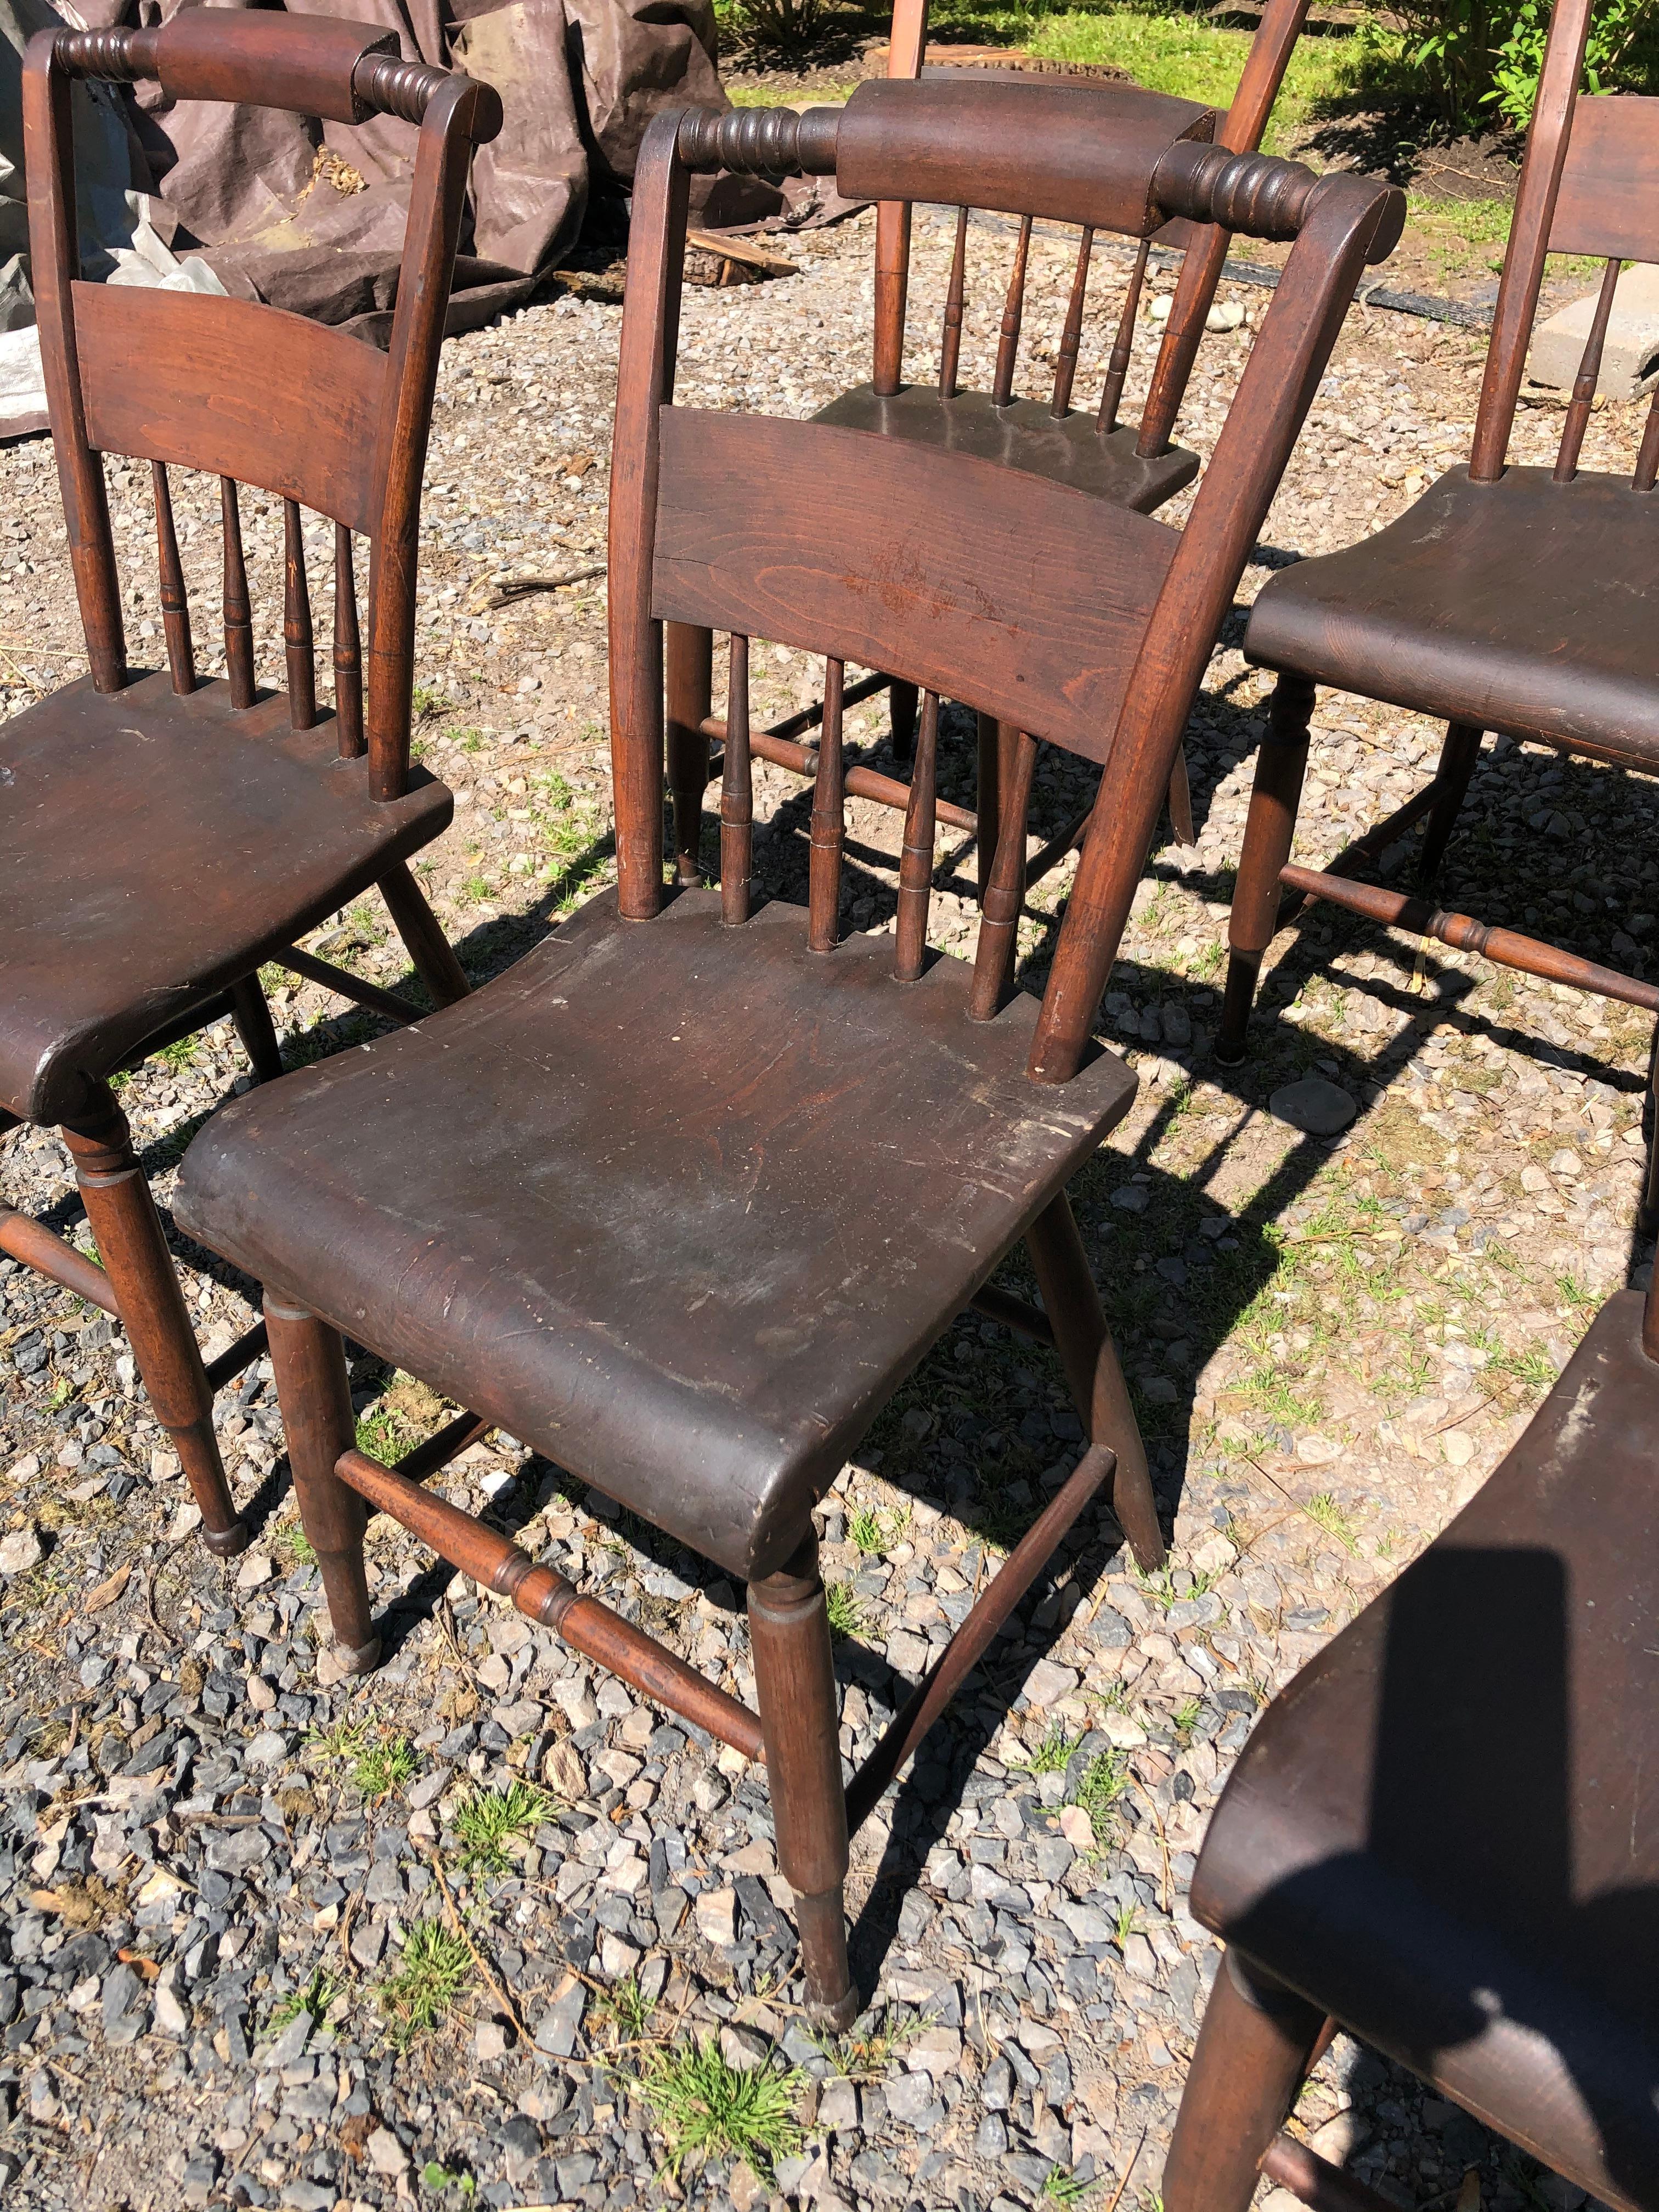 A charming set of 8 farmhouse style spindle back dining chairs having turned legs and molded seats.
The chairs are sturdy but much loved. Could use a spit and polish, but they are priced as is.
Note: There's a versatile drop leaf dining table to